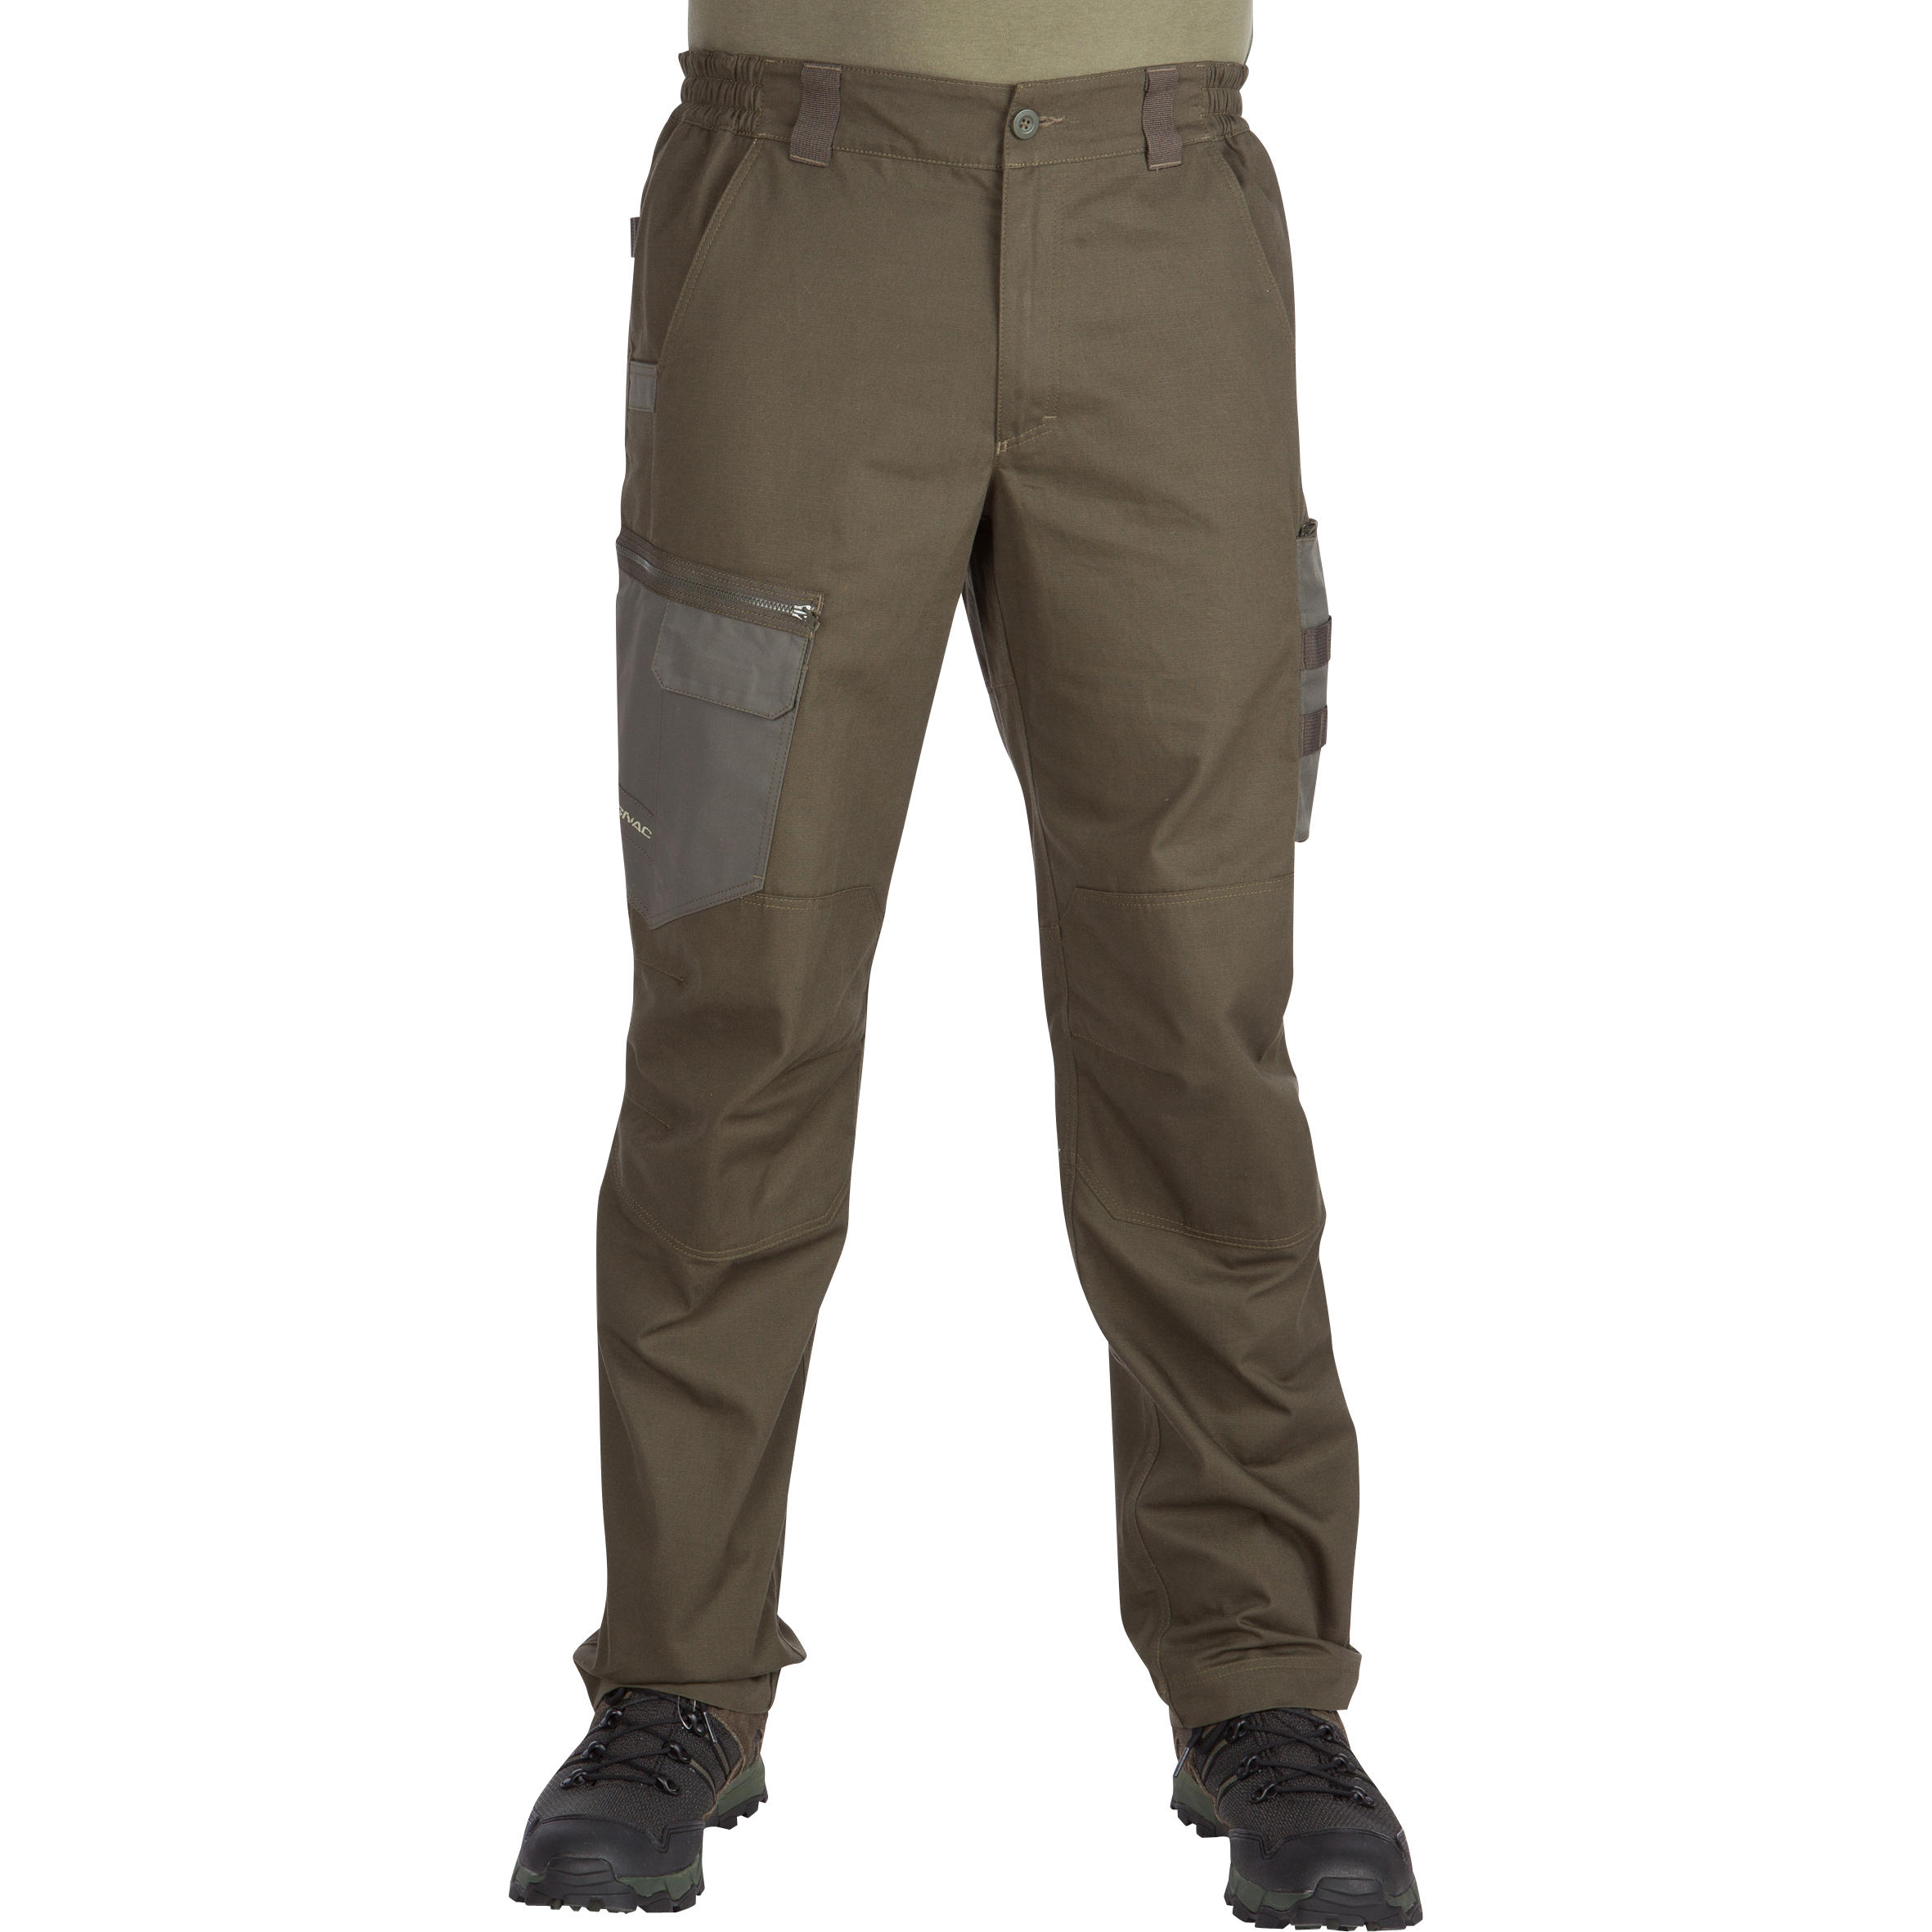 Superflex Cargo Pants: The Ultimate Comfy And Stylish Cargo Pants For -  LINDBERGH